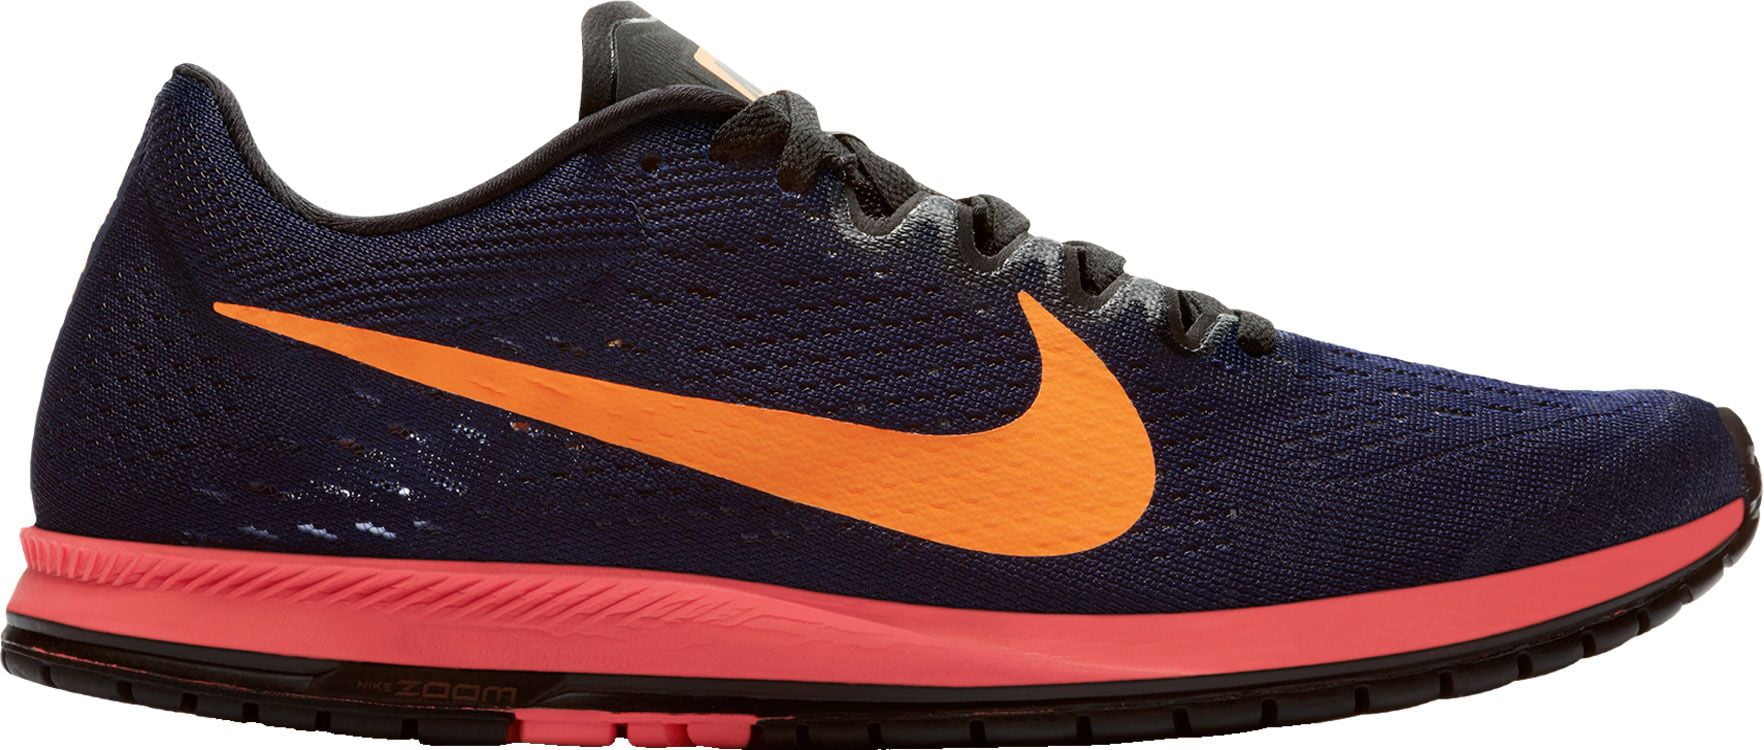 cross country shoes nike